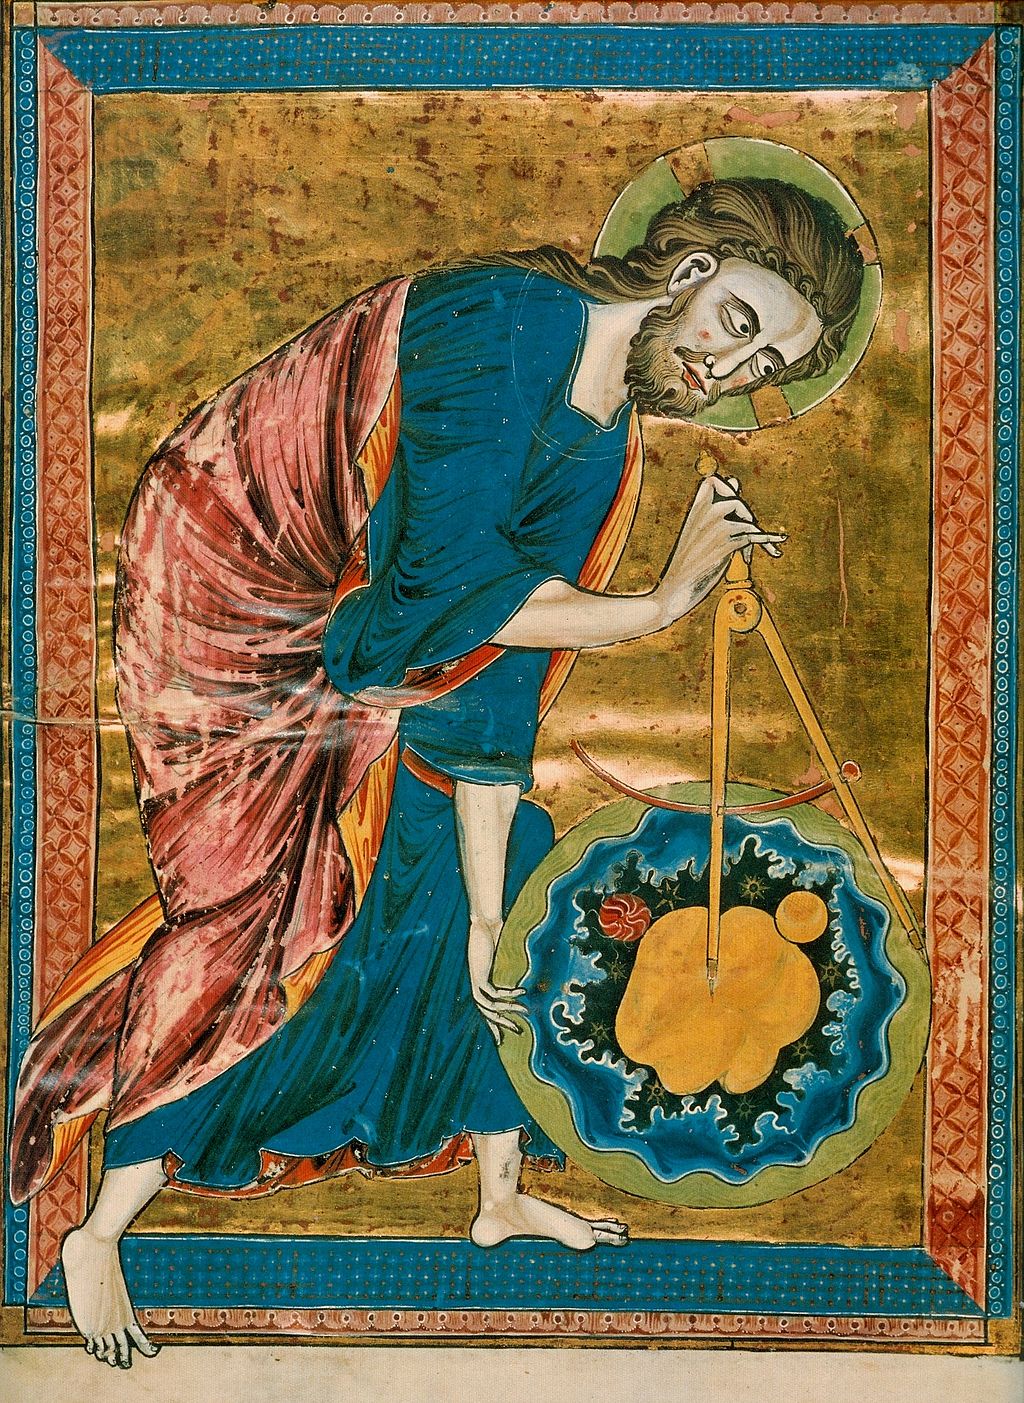 God as the architect of the World, from the Bible Moralisée, French, c. 1220-1230 (Osterreichische Nationalbibliothek, Vienna, Codex Vindobonensis 2554, f.1 verso)